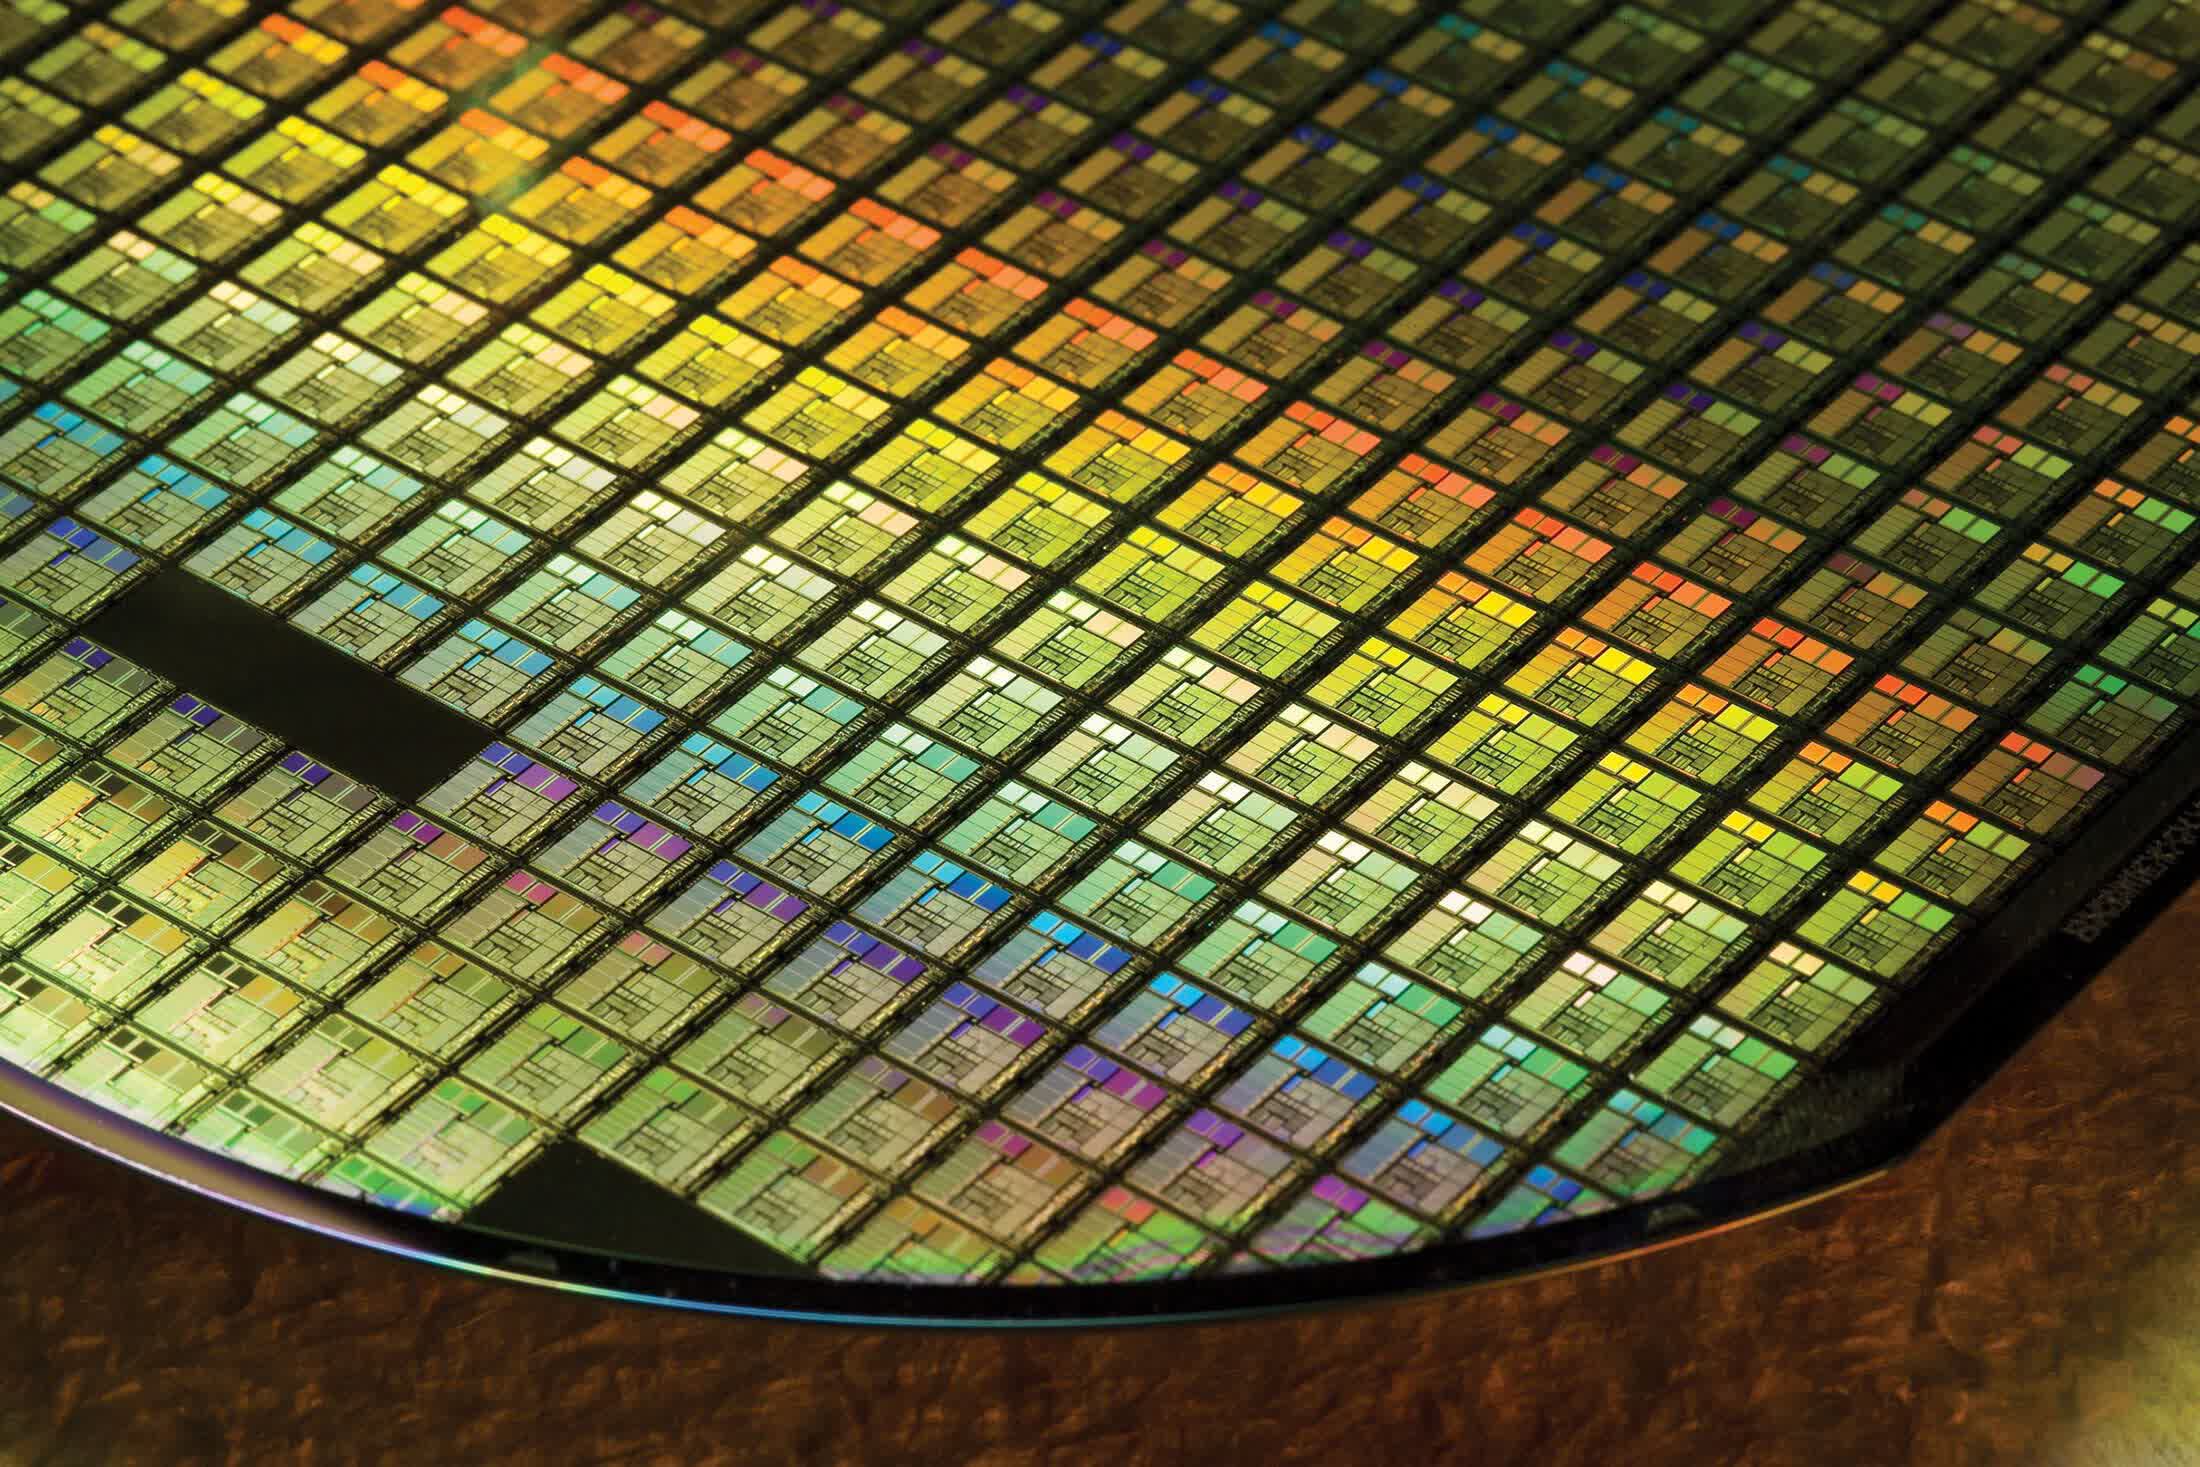 Russia plans to manufacture chips locally on a 28 nm node by 2030